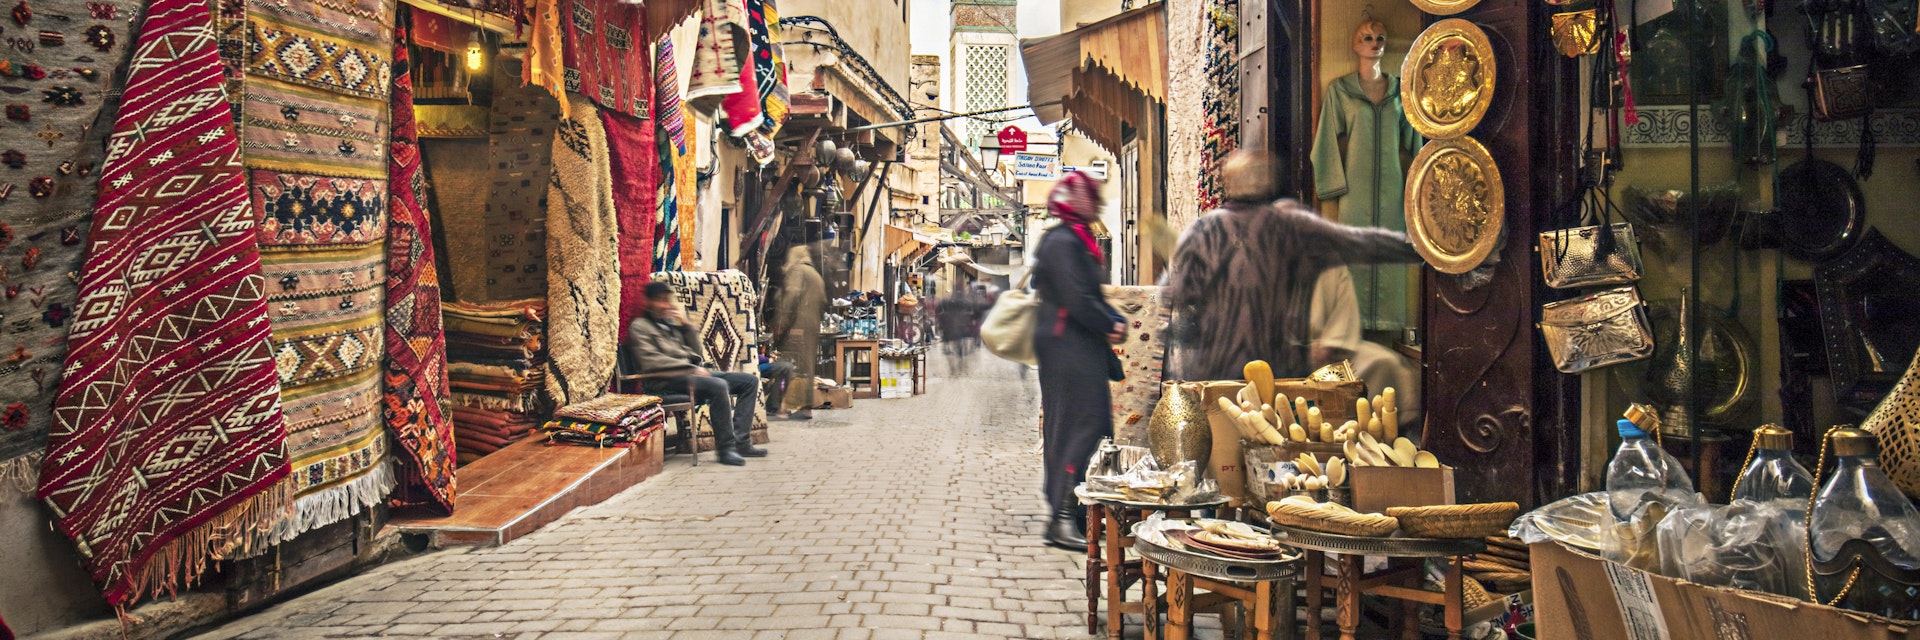 Stores in the medina streets of Fez, Morocco.
653452628
Exoticism, Spice, Africa, Souk, Market - Retail Space, Travel, F